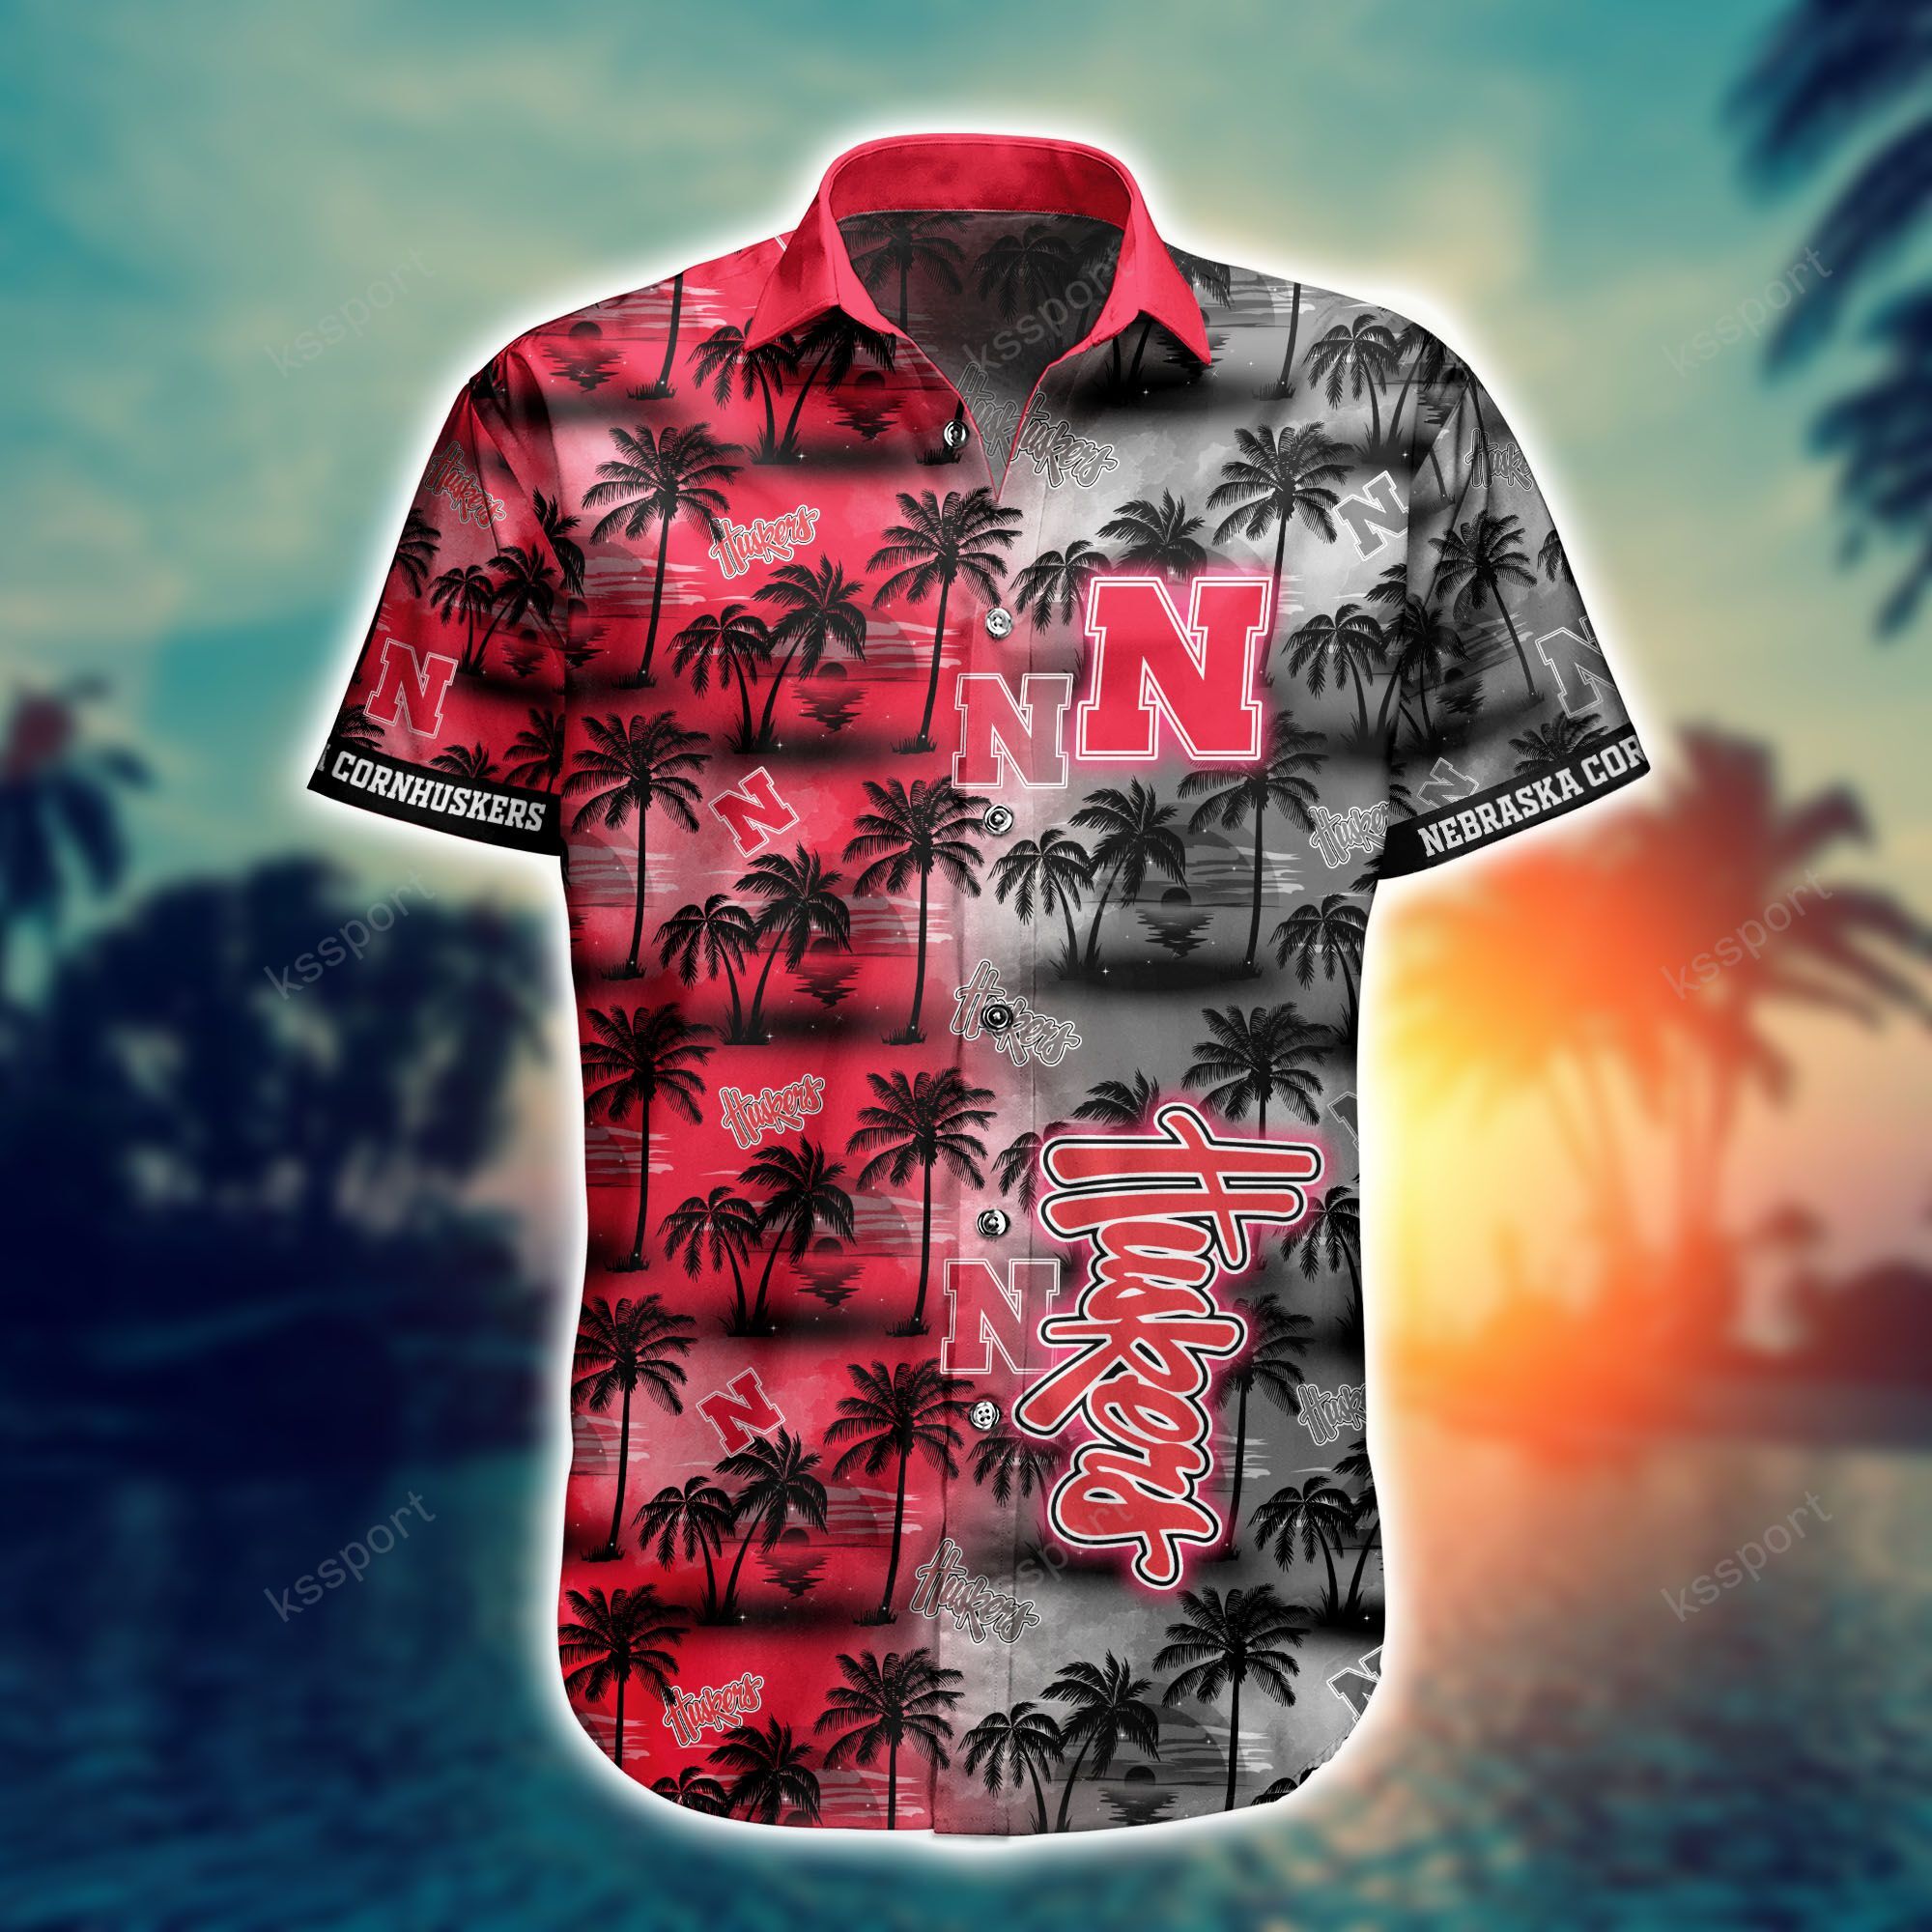 Top cool Hawaiian shirt 2022 - Make sure you get yours today before they run out! 156